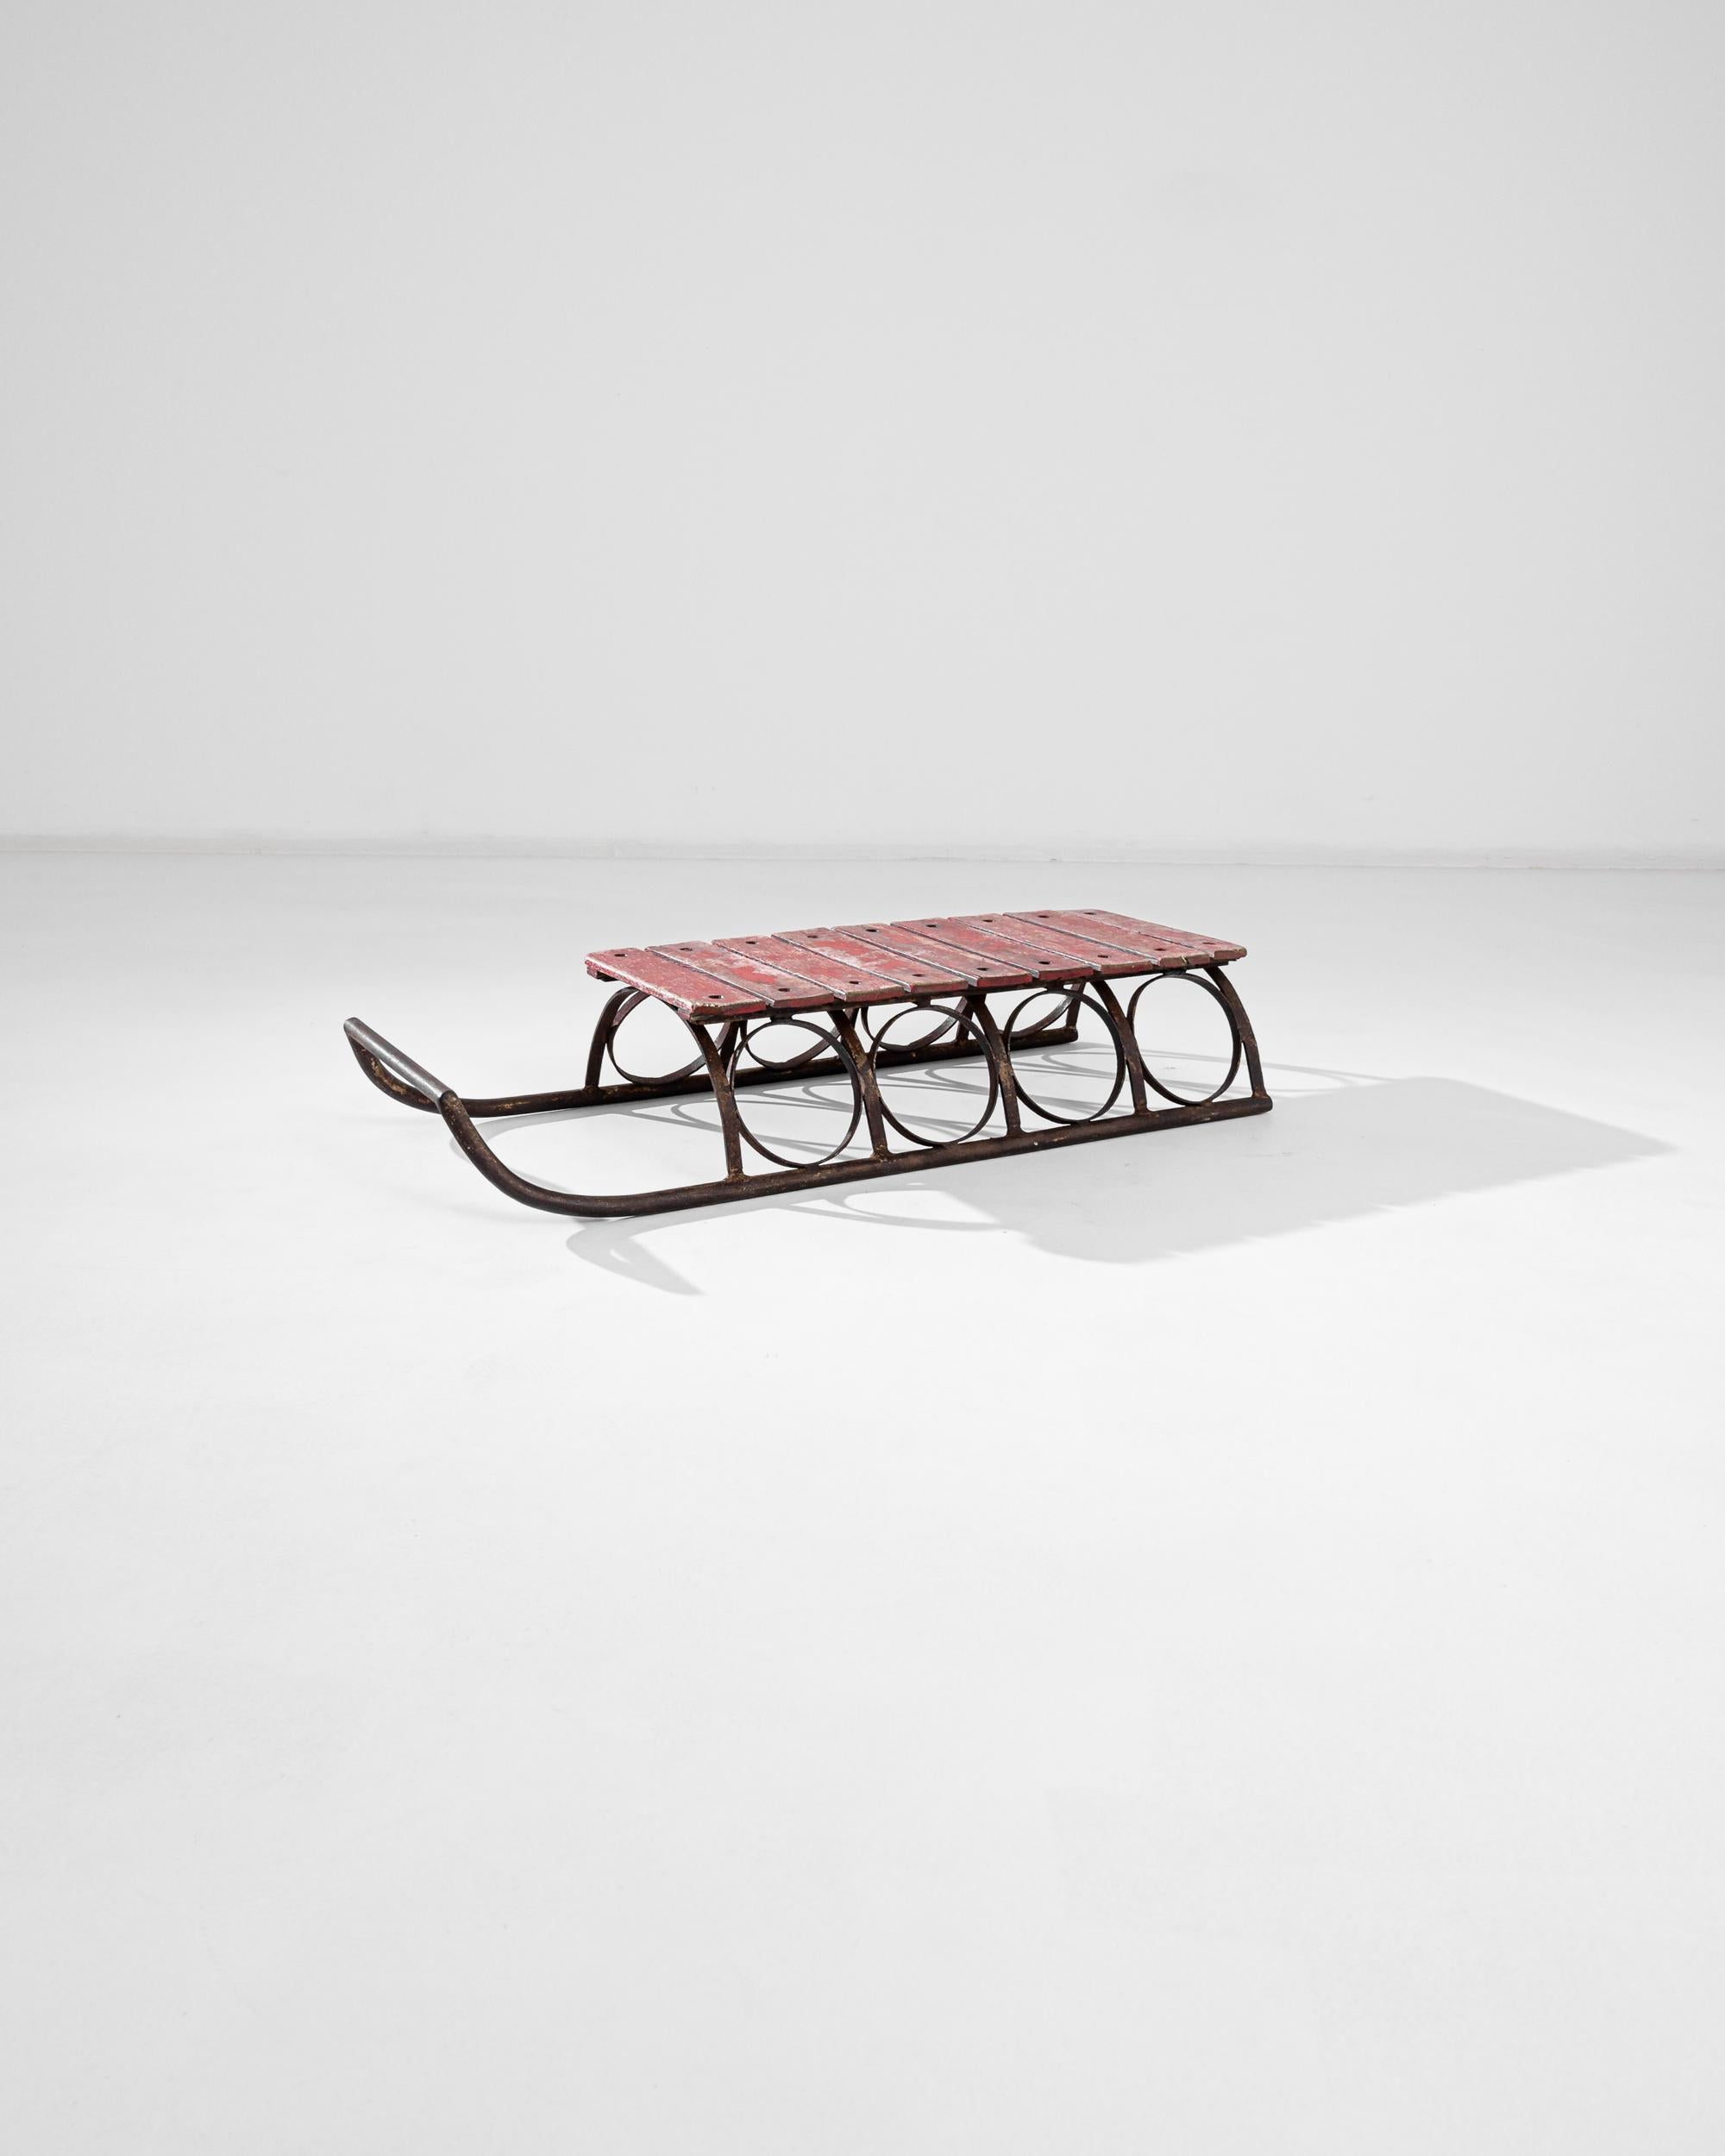 A 20th century metal sledge with a wooden seat, produced in France. A wrought iron circle structure supports candy red boards with a beautiful original patina. An antique with a heart, this versatile sledge can serve as a bench as well as a